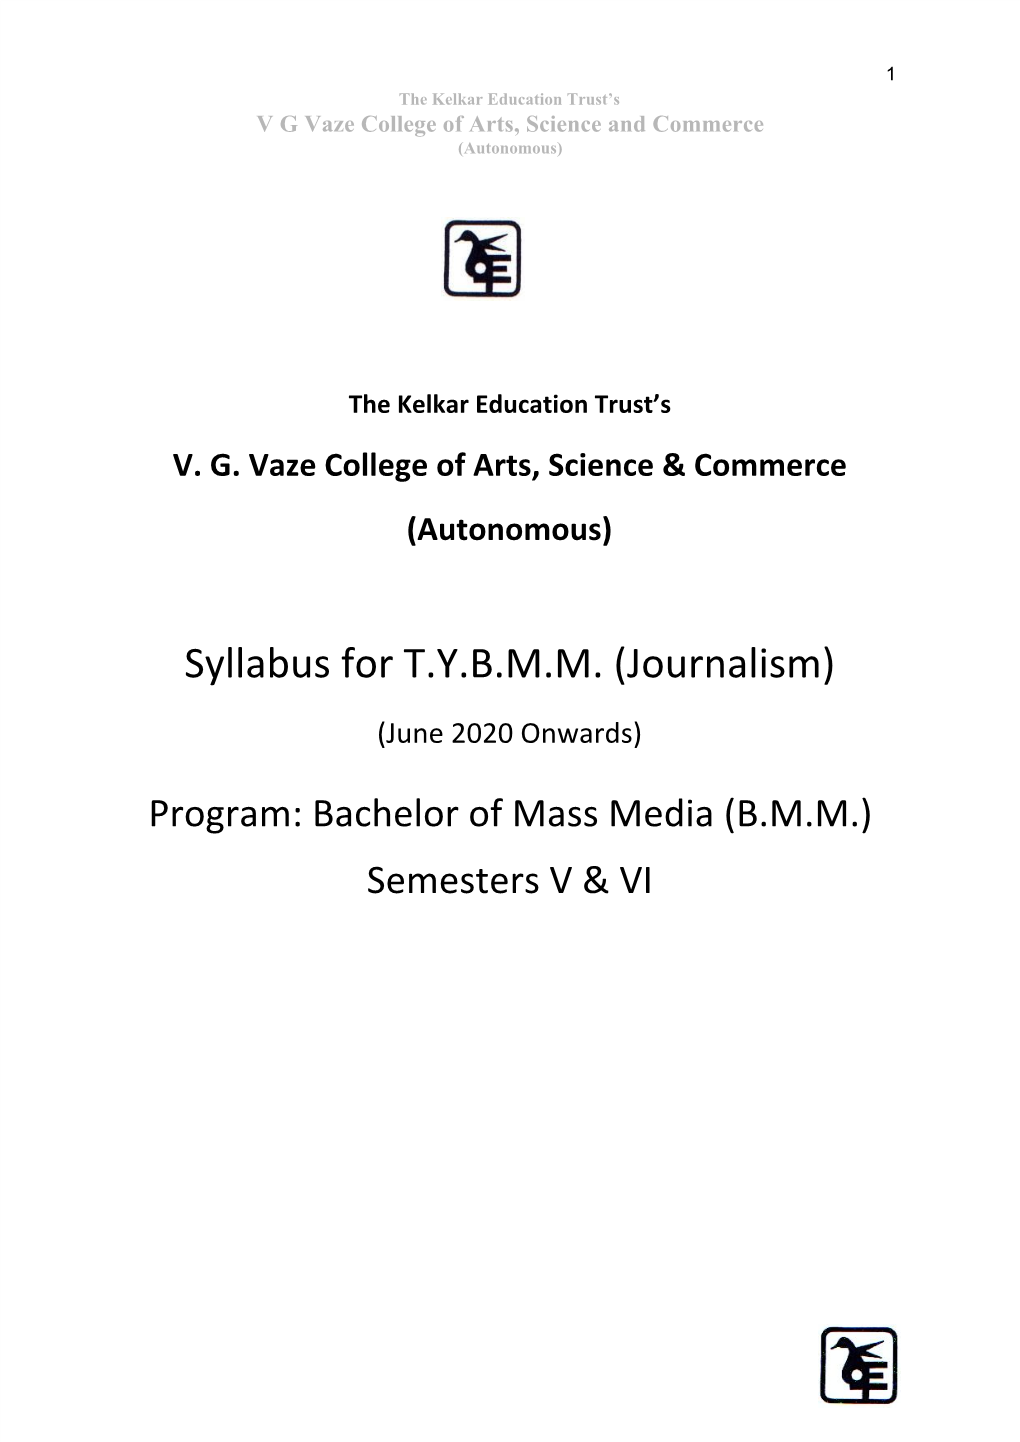 TYBMM Journalism Semesters V and VI for 2020-2021